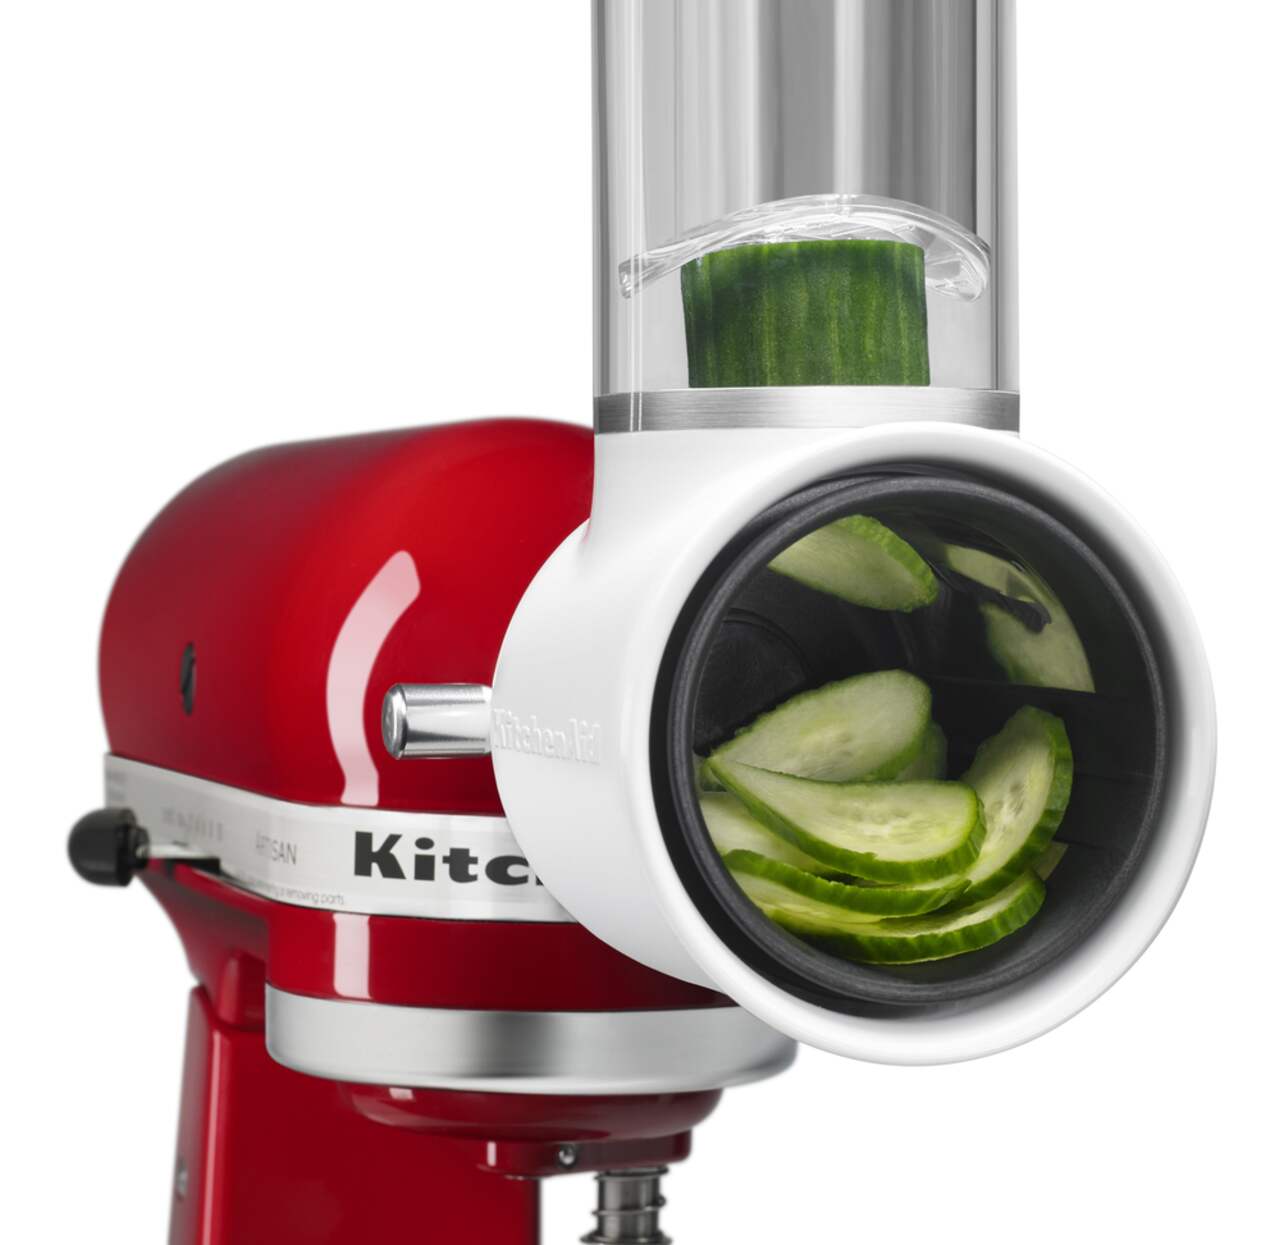 https://media-www.canadiantire.ca/product/living/kitchen/kitchen-appliances/0430030/kitchenaid-roto-slicer-with-shredder-41f17bd4-3e89-46f7-aff8-2693e6bd04c6.png?imdensity=1&imwidth=1244&impolicy=mZoom